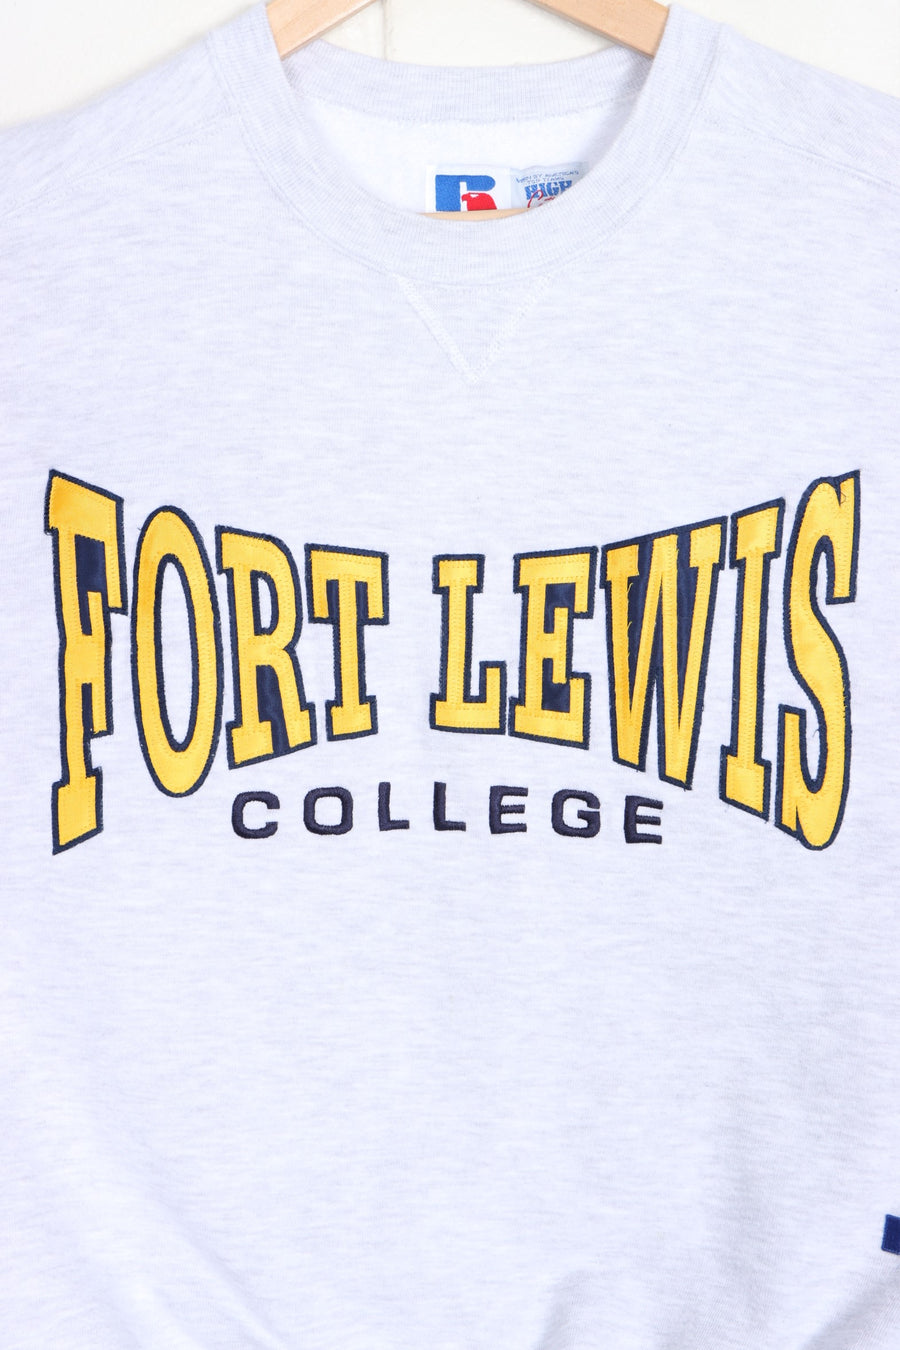 Fort Lewis College RUSSELL ATHLETIC Sweatshirt USA Made (L)